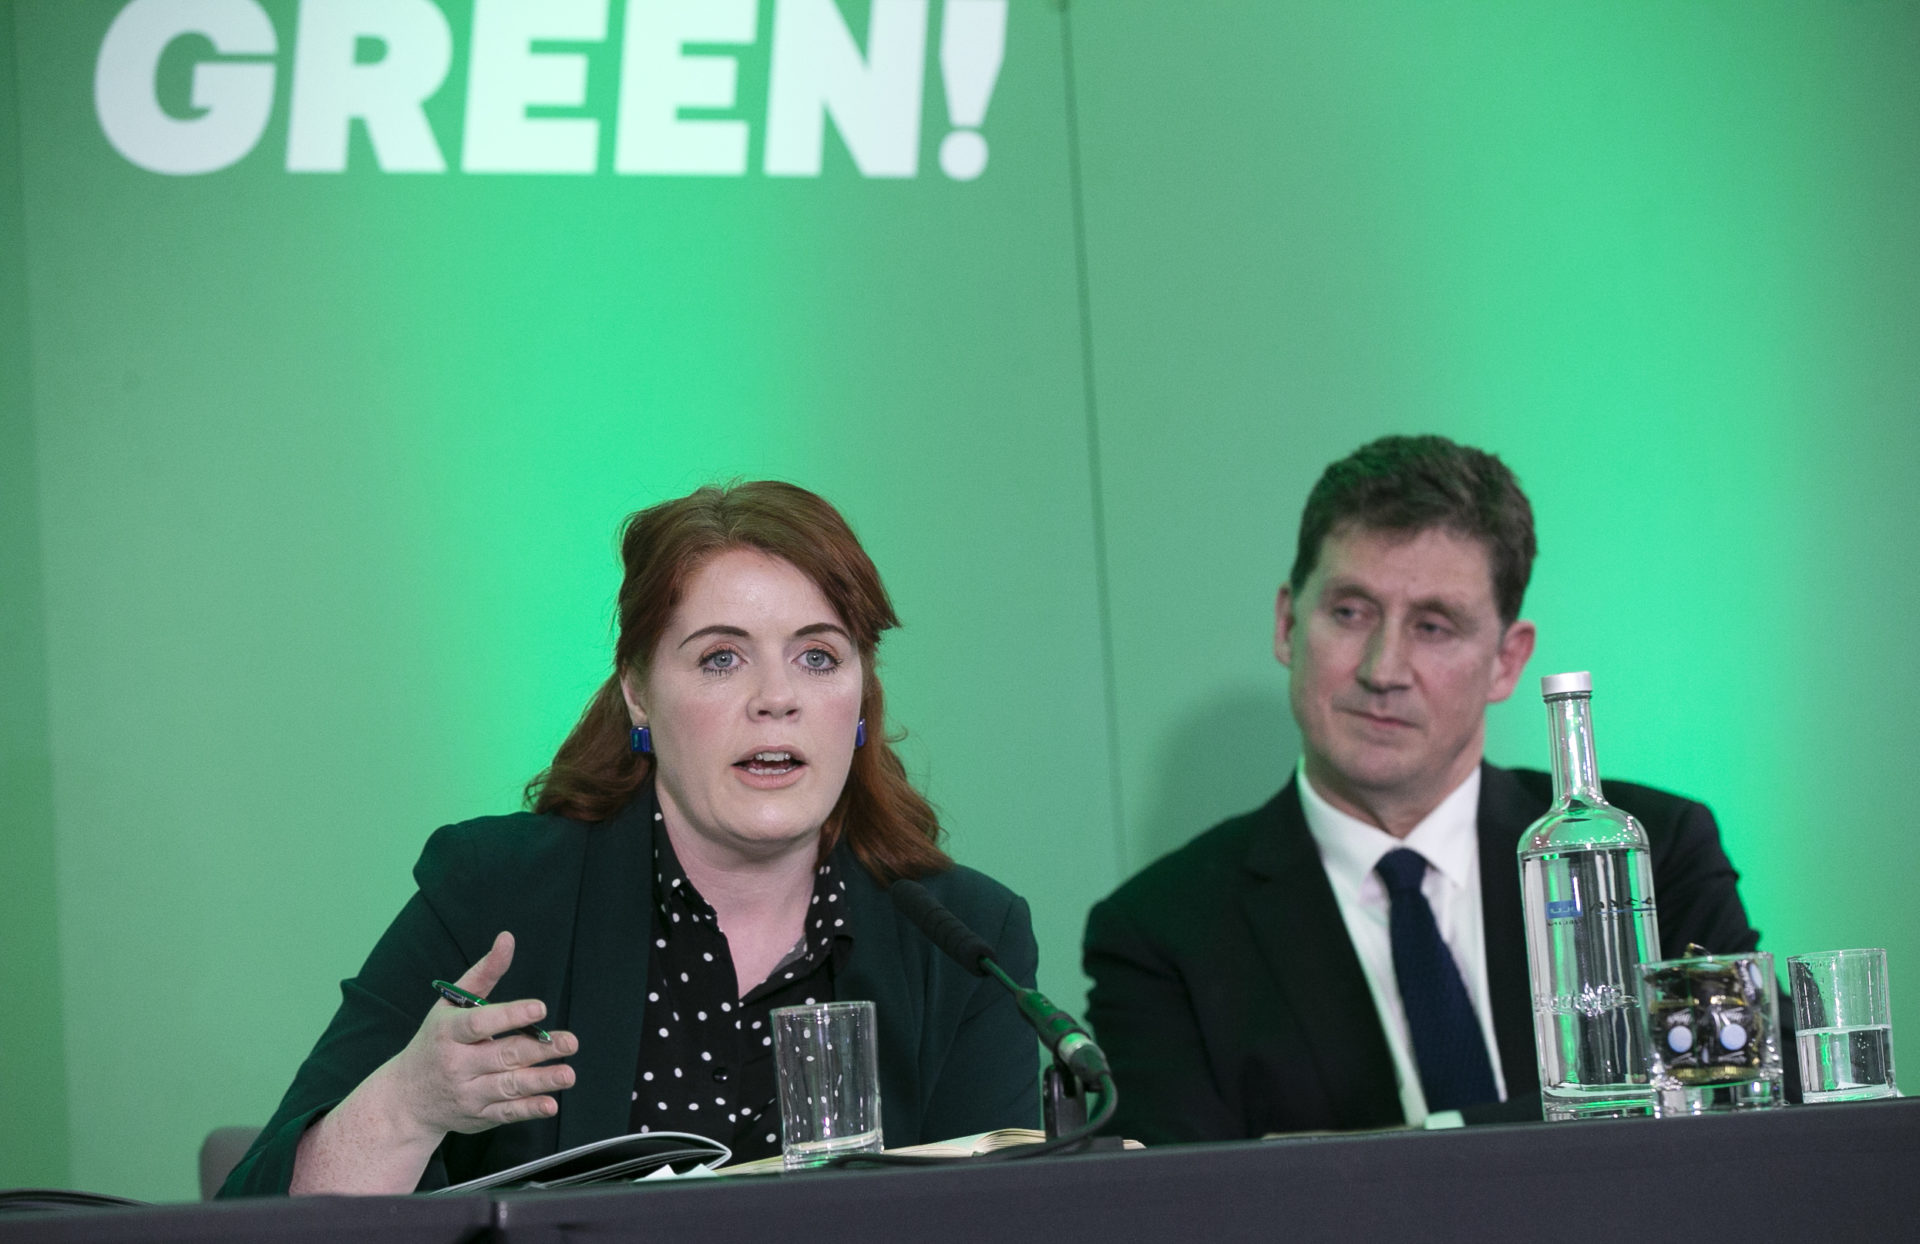 Neasa Hourigan and Green Party leader Eamon Ryan speaking to the media at the Radisson Blu Hotel, Dublin at the launch of the party's manifesto in January 2020.